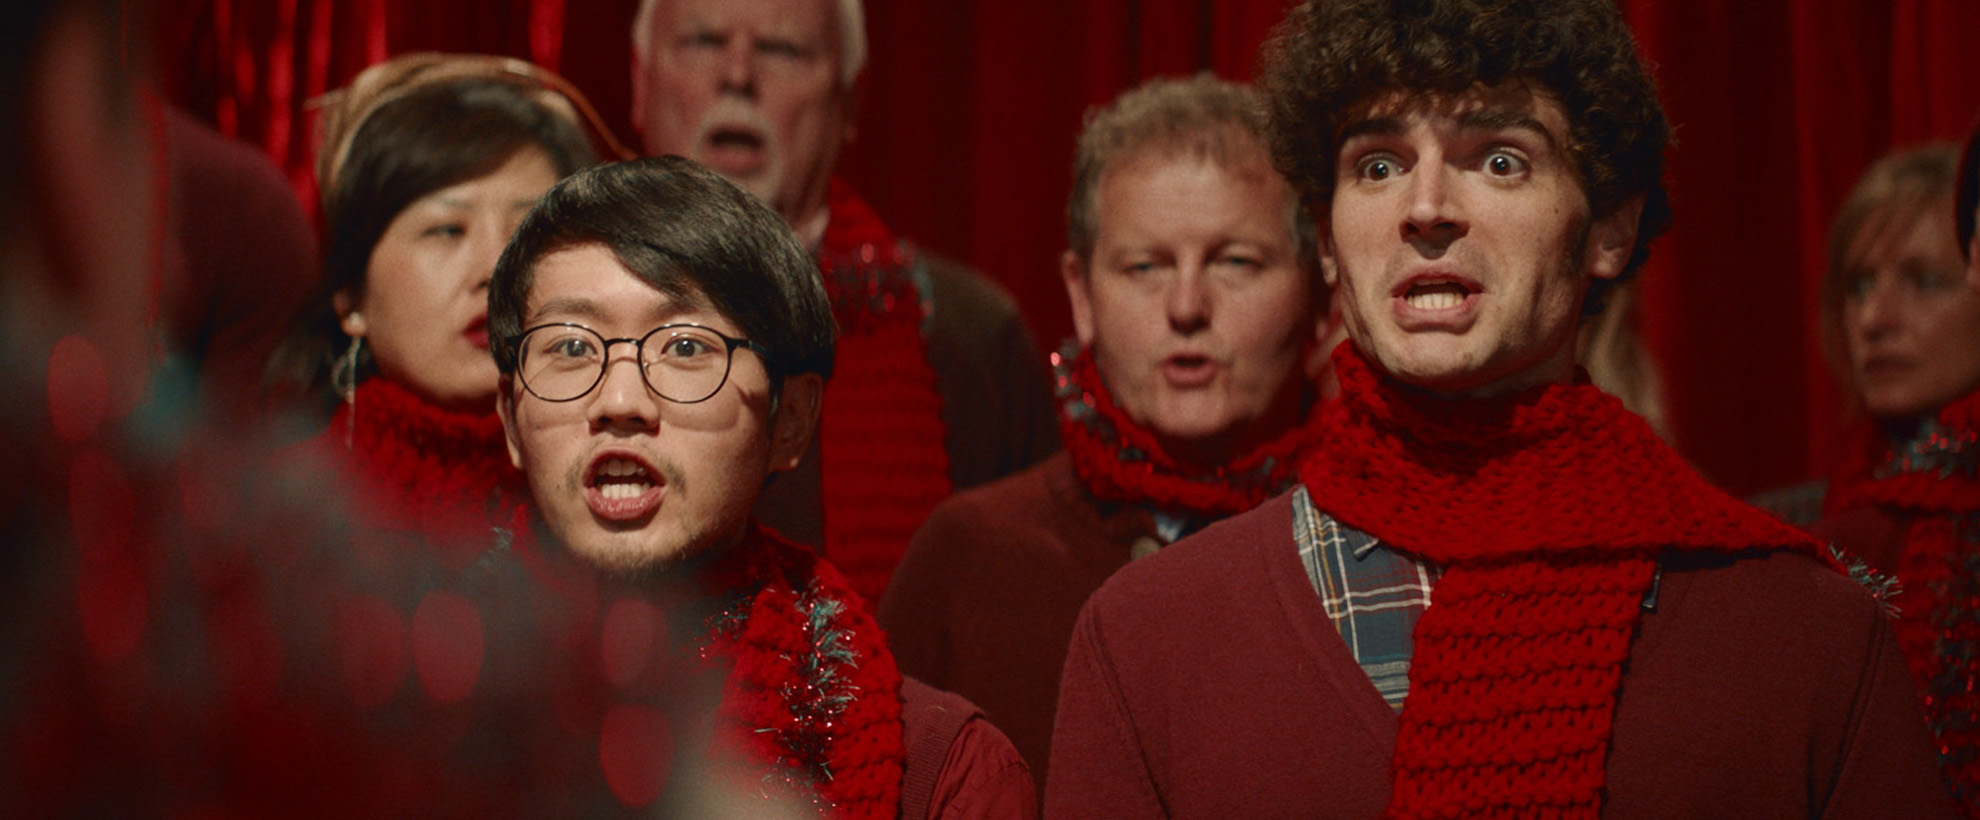 Men in red sweats and red scarves singing